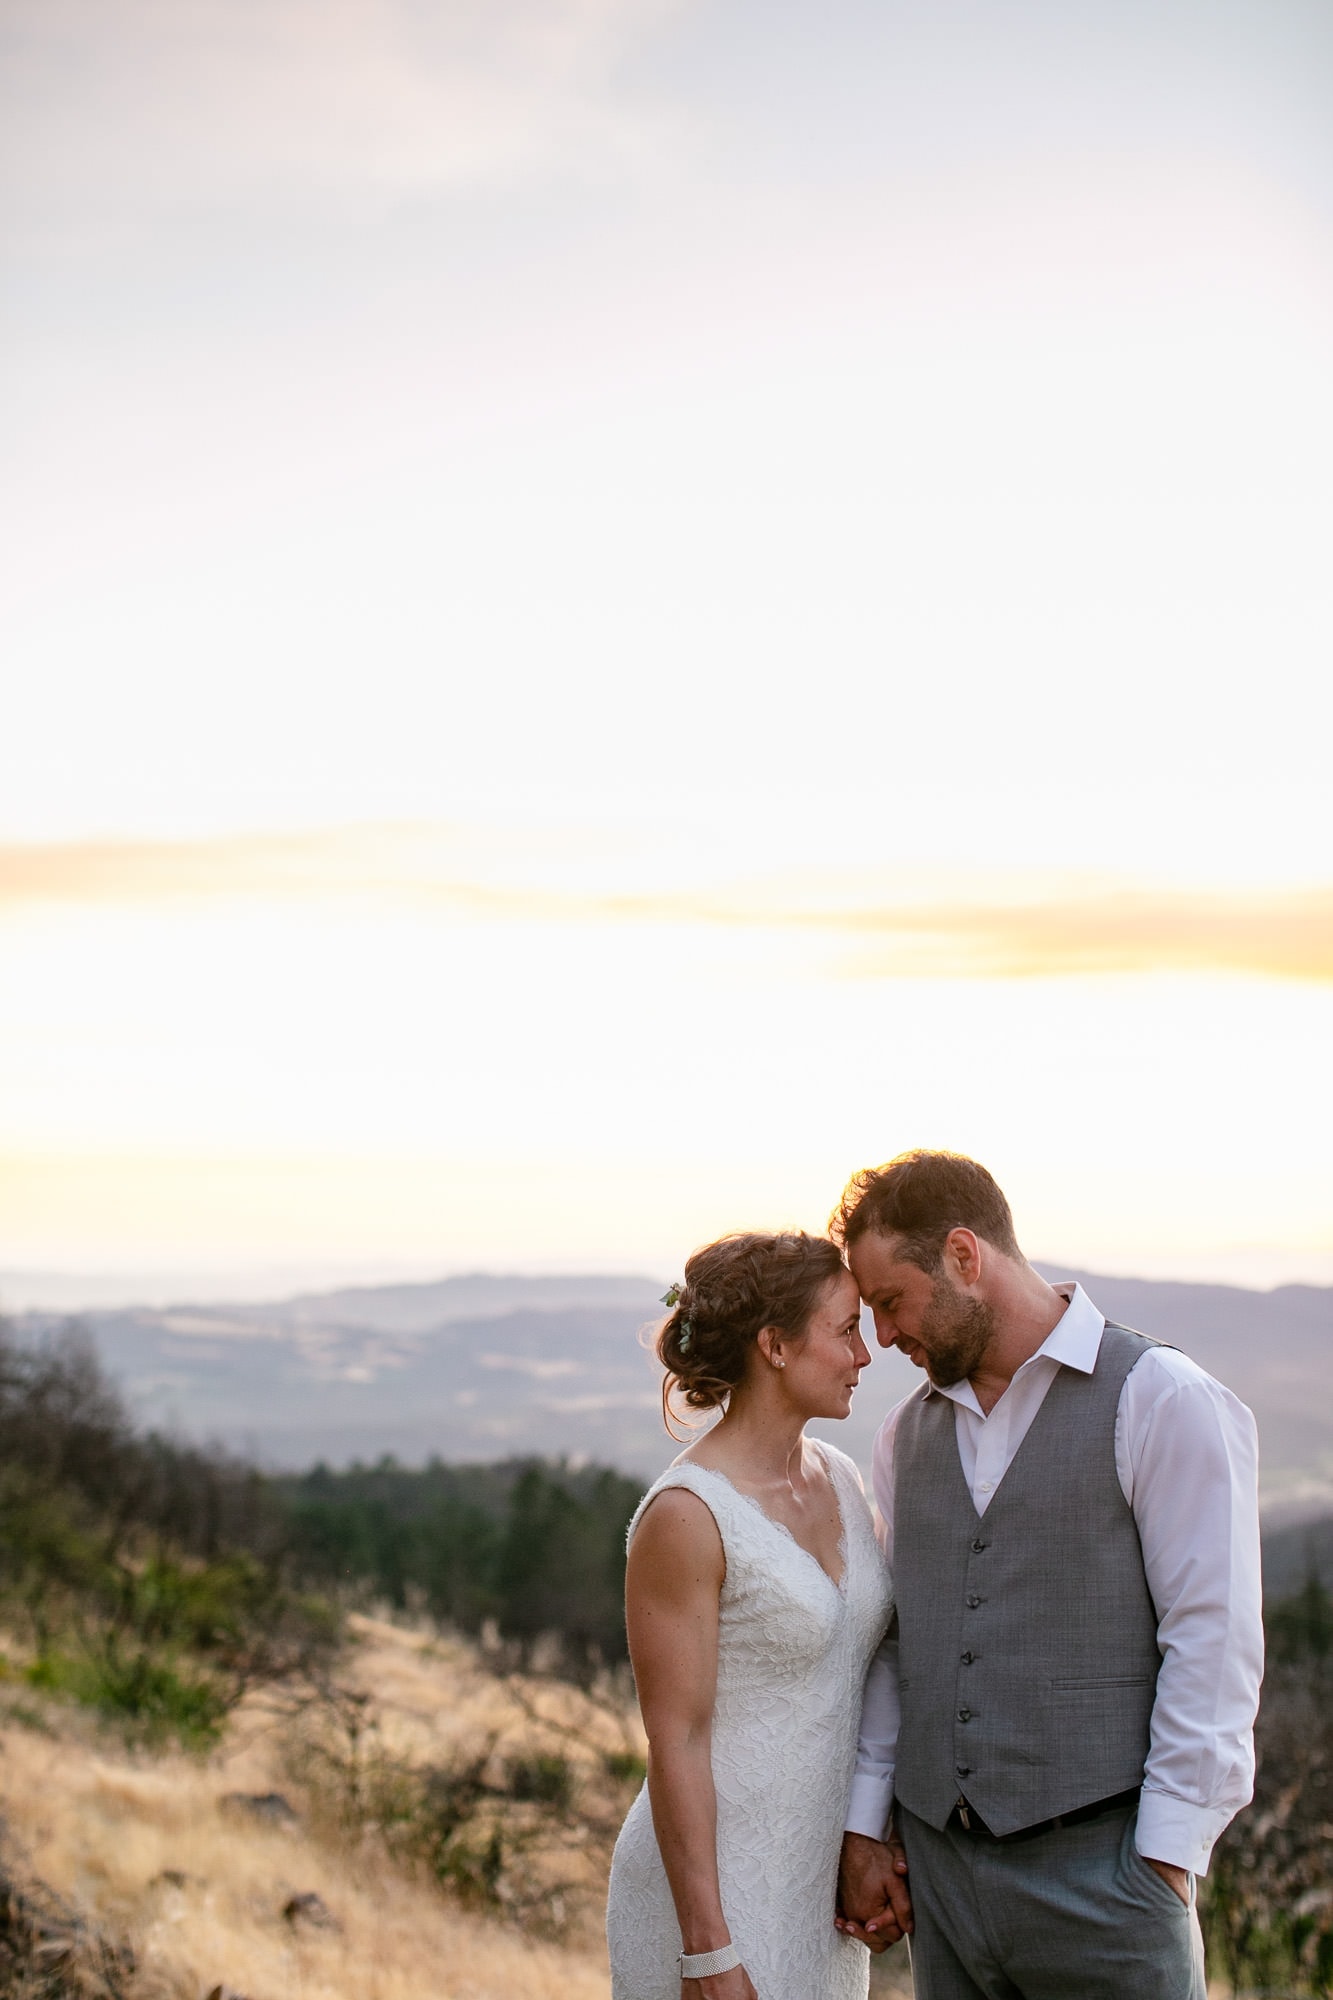 Wedding couple portraits outdoors in Santa Rosa after Northern California fires